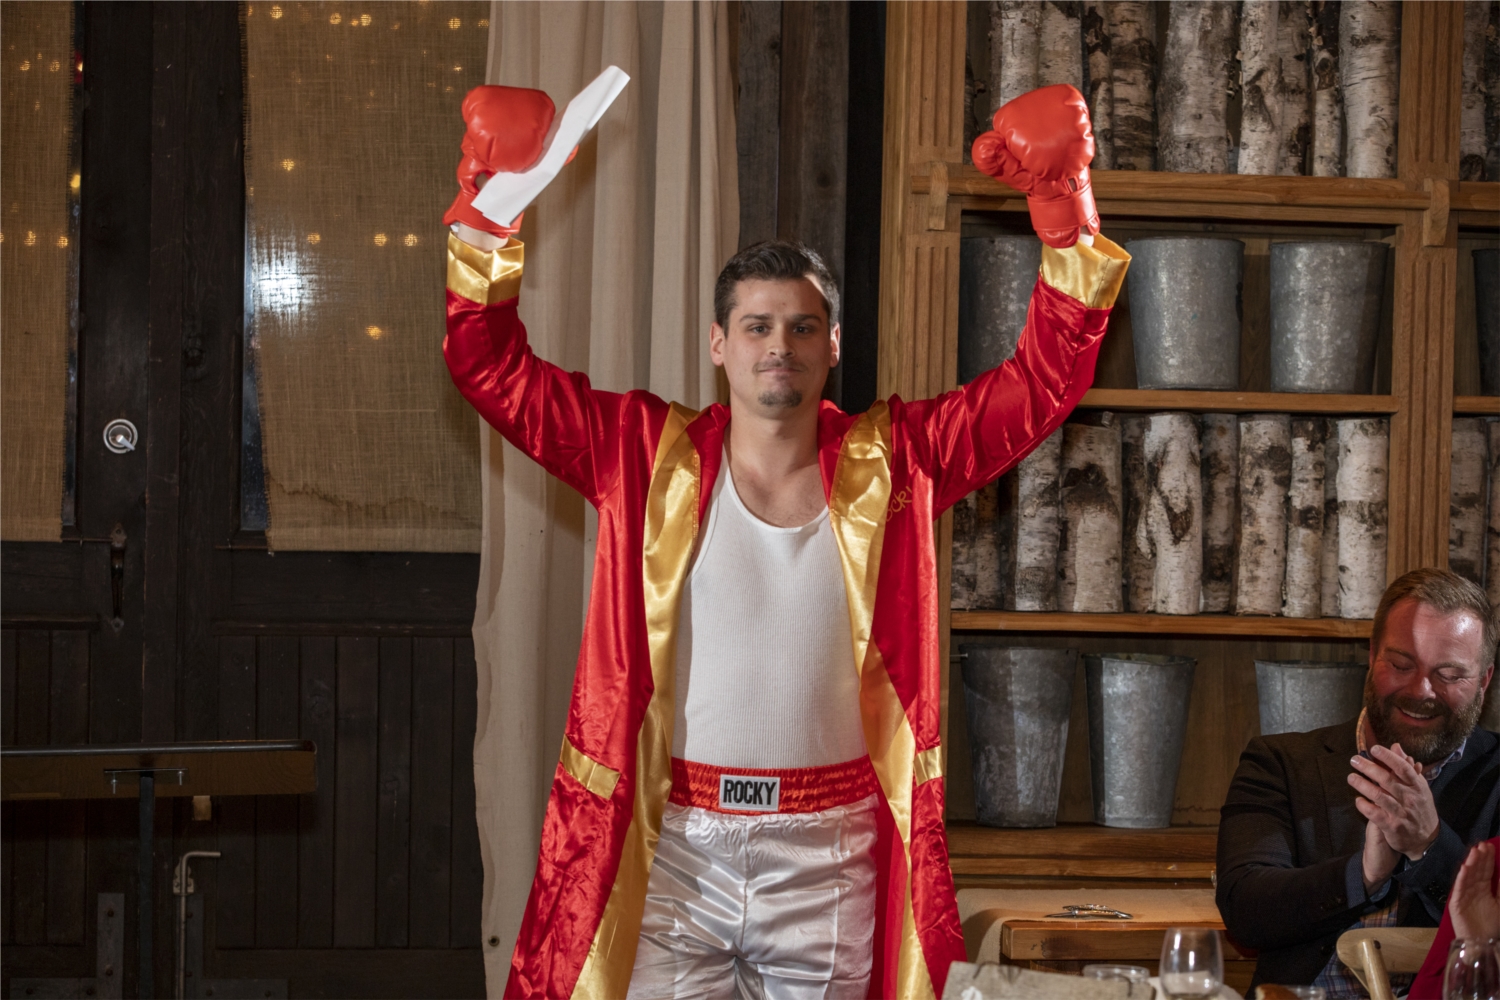 Each month, an employee is awarded with the "Rocky" - a sign of determination and grit in the face of challenges. At our Sales Conference, employee Matt Dolan dressed up as the Italian Stallion to recognize the 12 winners from 2019.